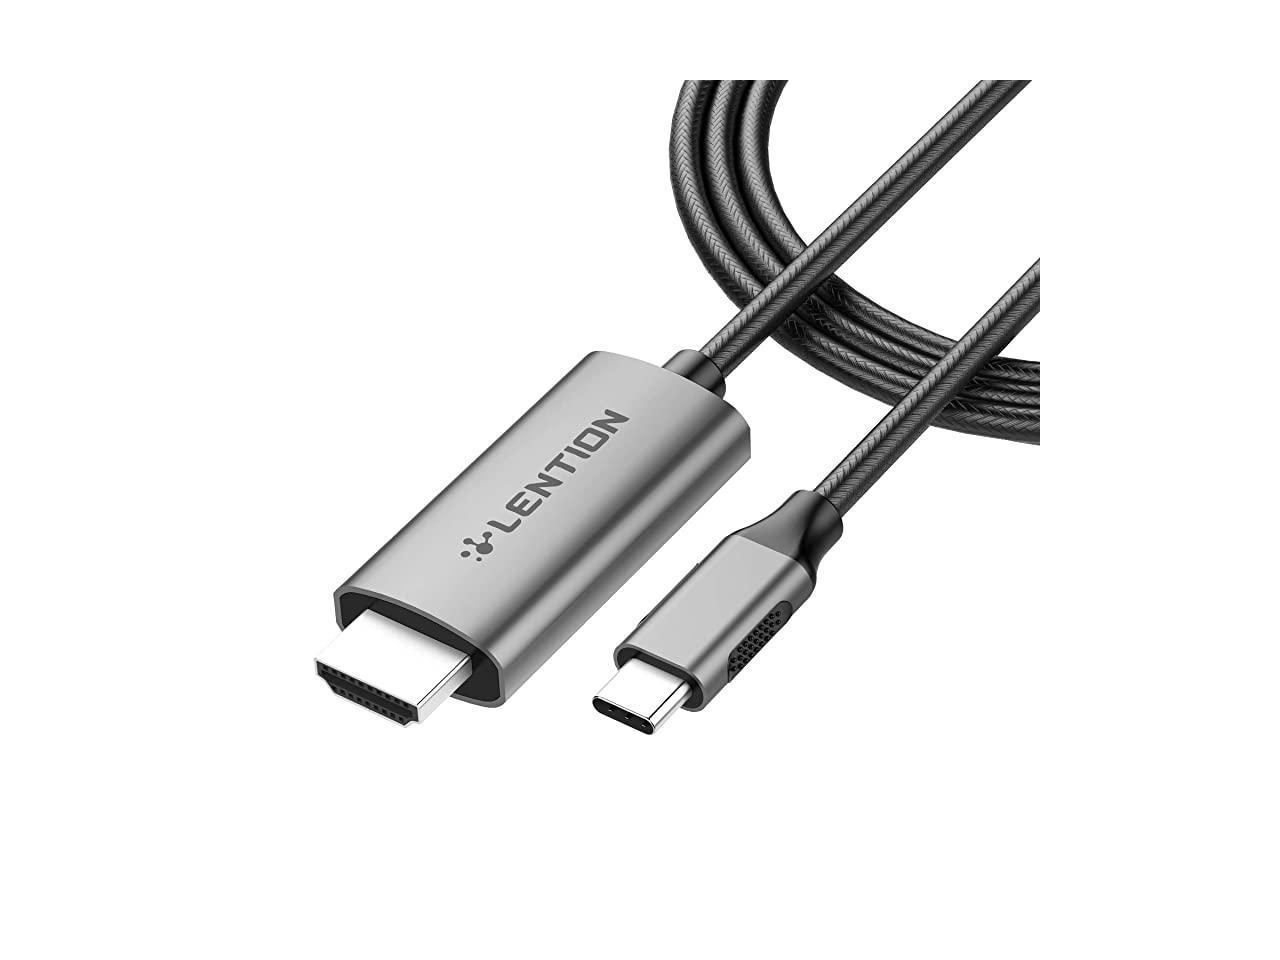 Compatible with iPad Pro,MacBook Pro 2018 iMac,ChromeBook Pixel,Galaxy S8/S9/Note9 Surface Book Thunderbolt 3 Compatible USB C to HDMI Cable Adapter,QGeeM 6ft Braided 4K@60Hz Cable Adapter